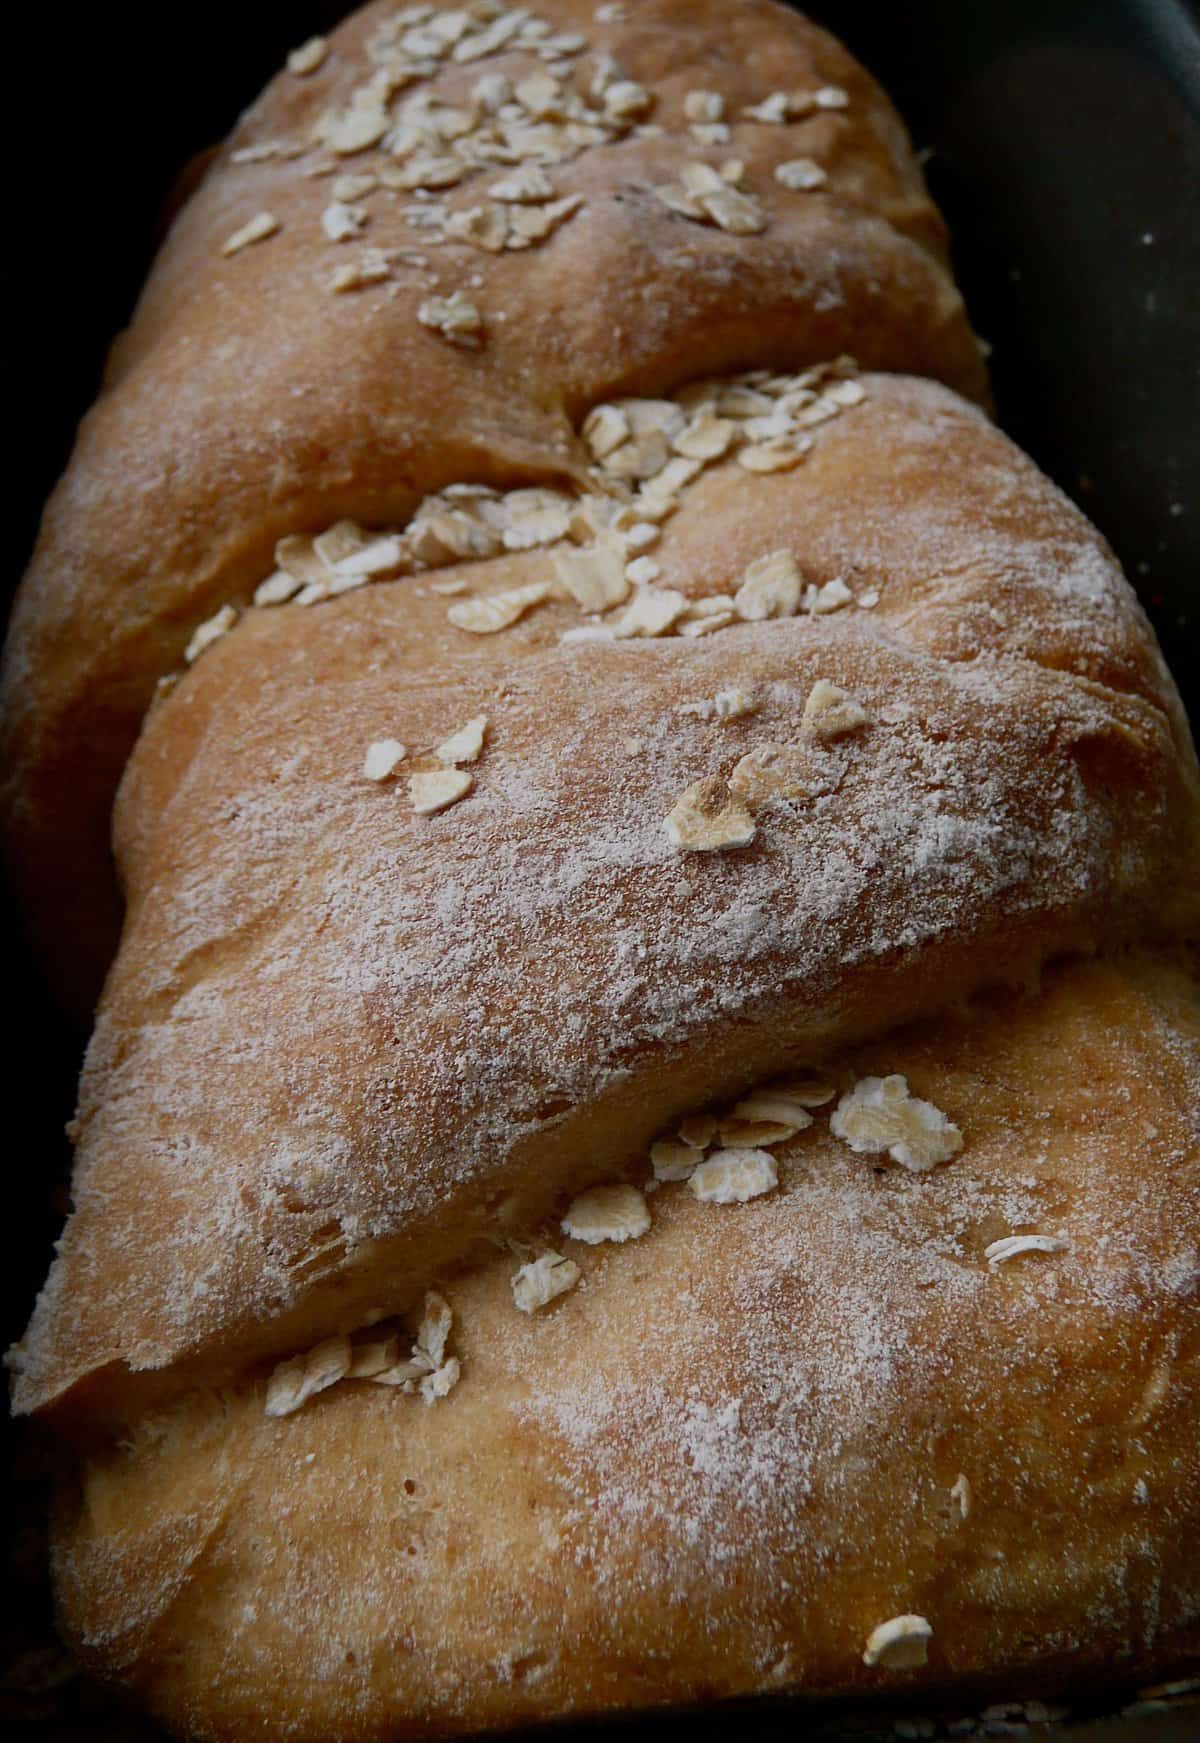  A warm slice of Irish Oatmeal Bread, perfect for a cozy breakfast or afternoon snack.